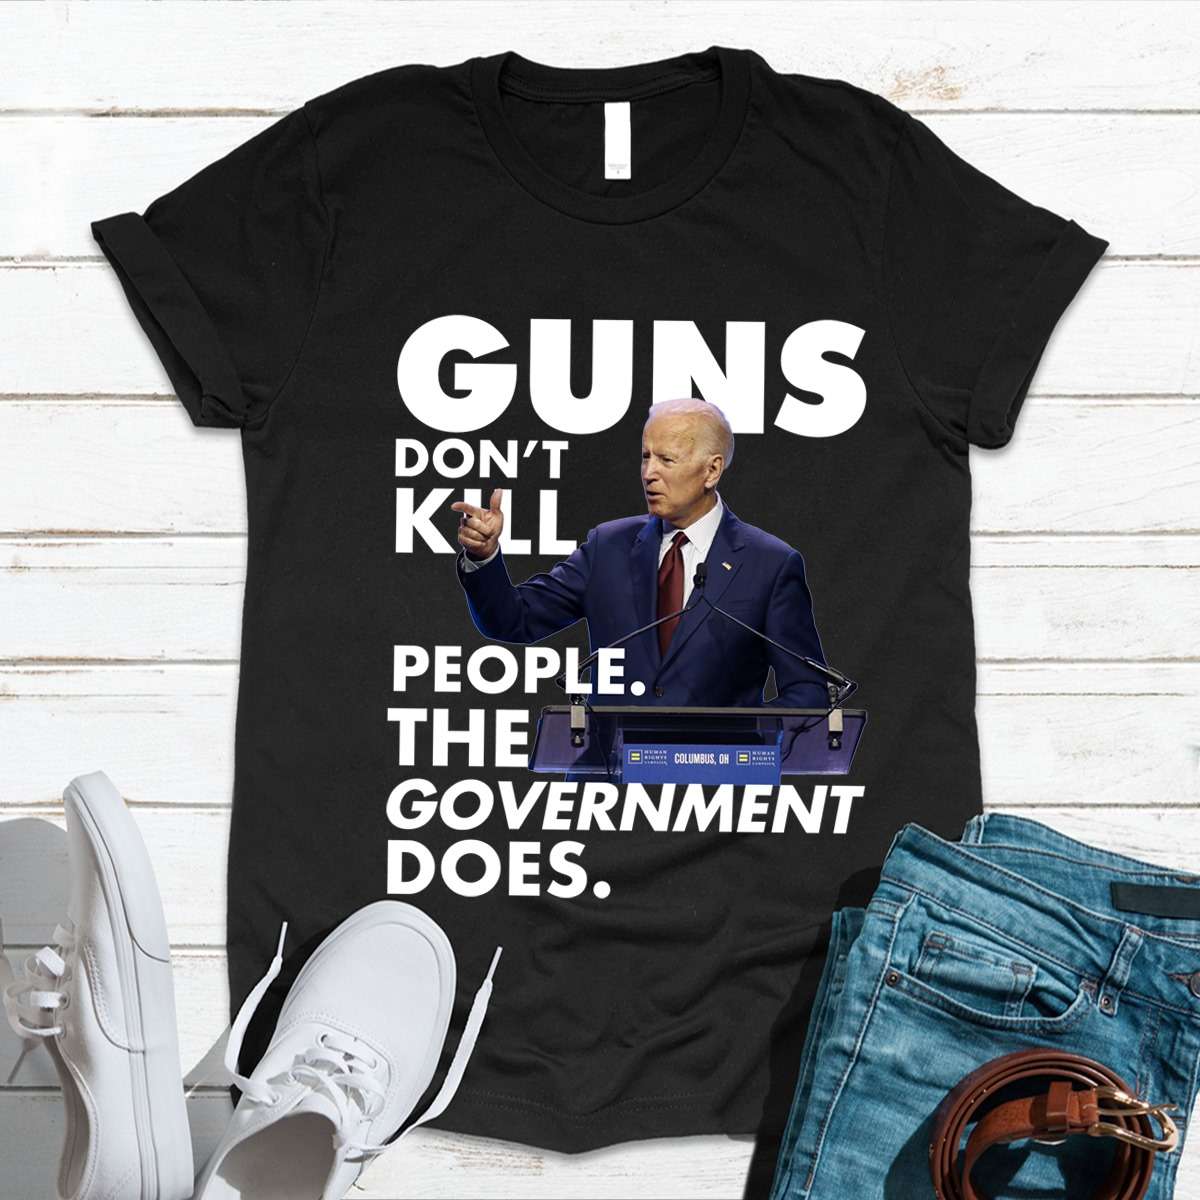 Guns don't kill people the government does